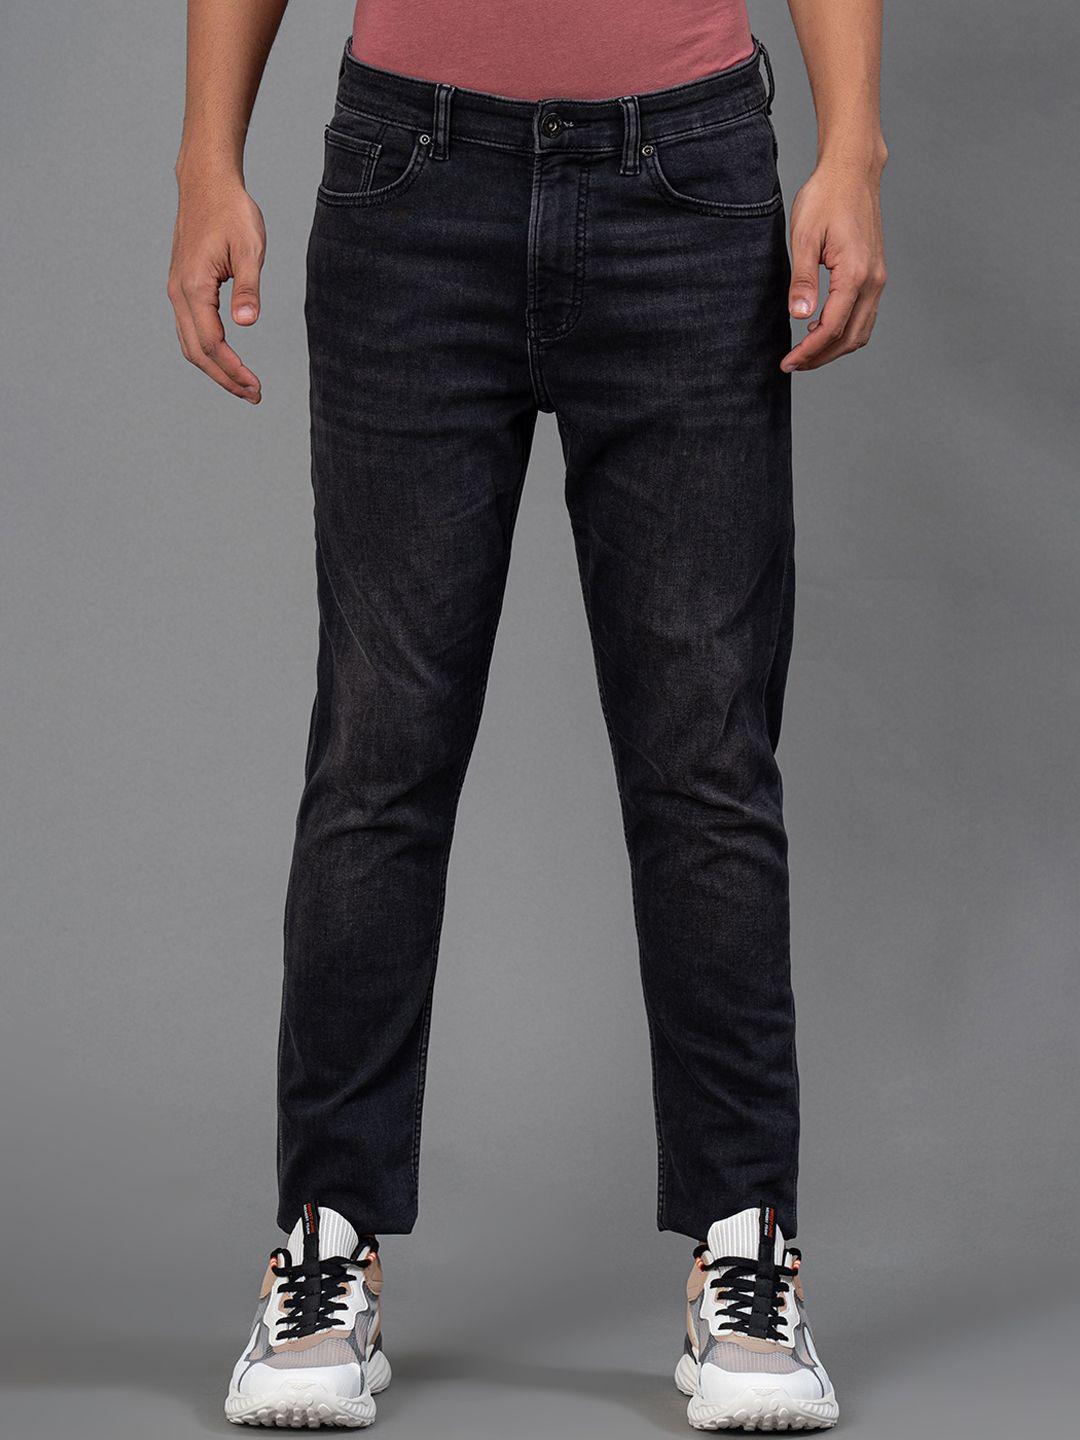 red-tape-men-relaxed-fit-clean-look-light-fade-cotton-jeans